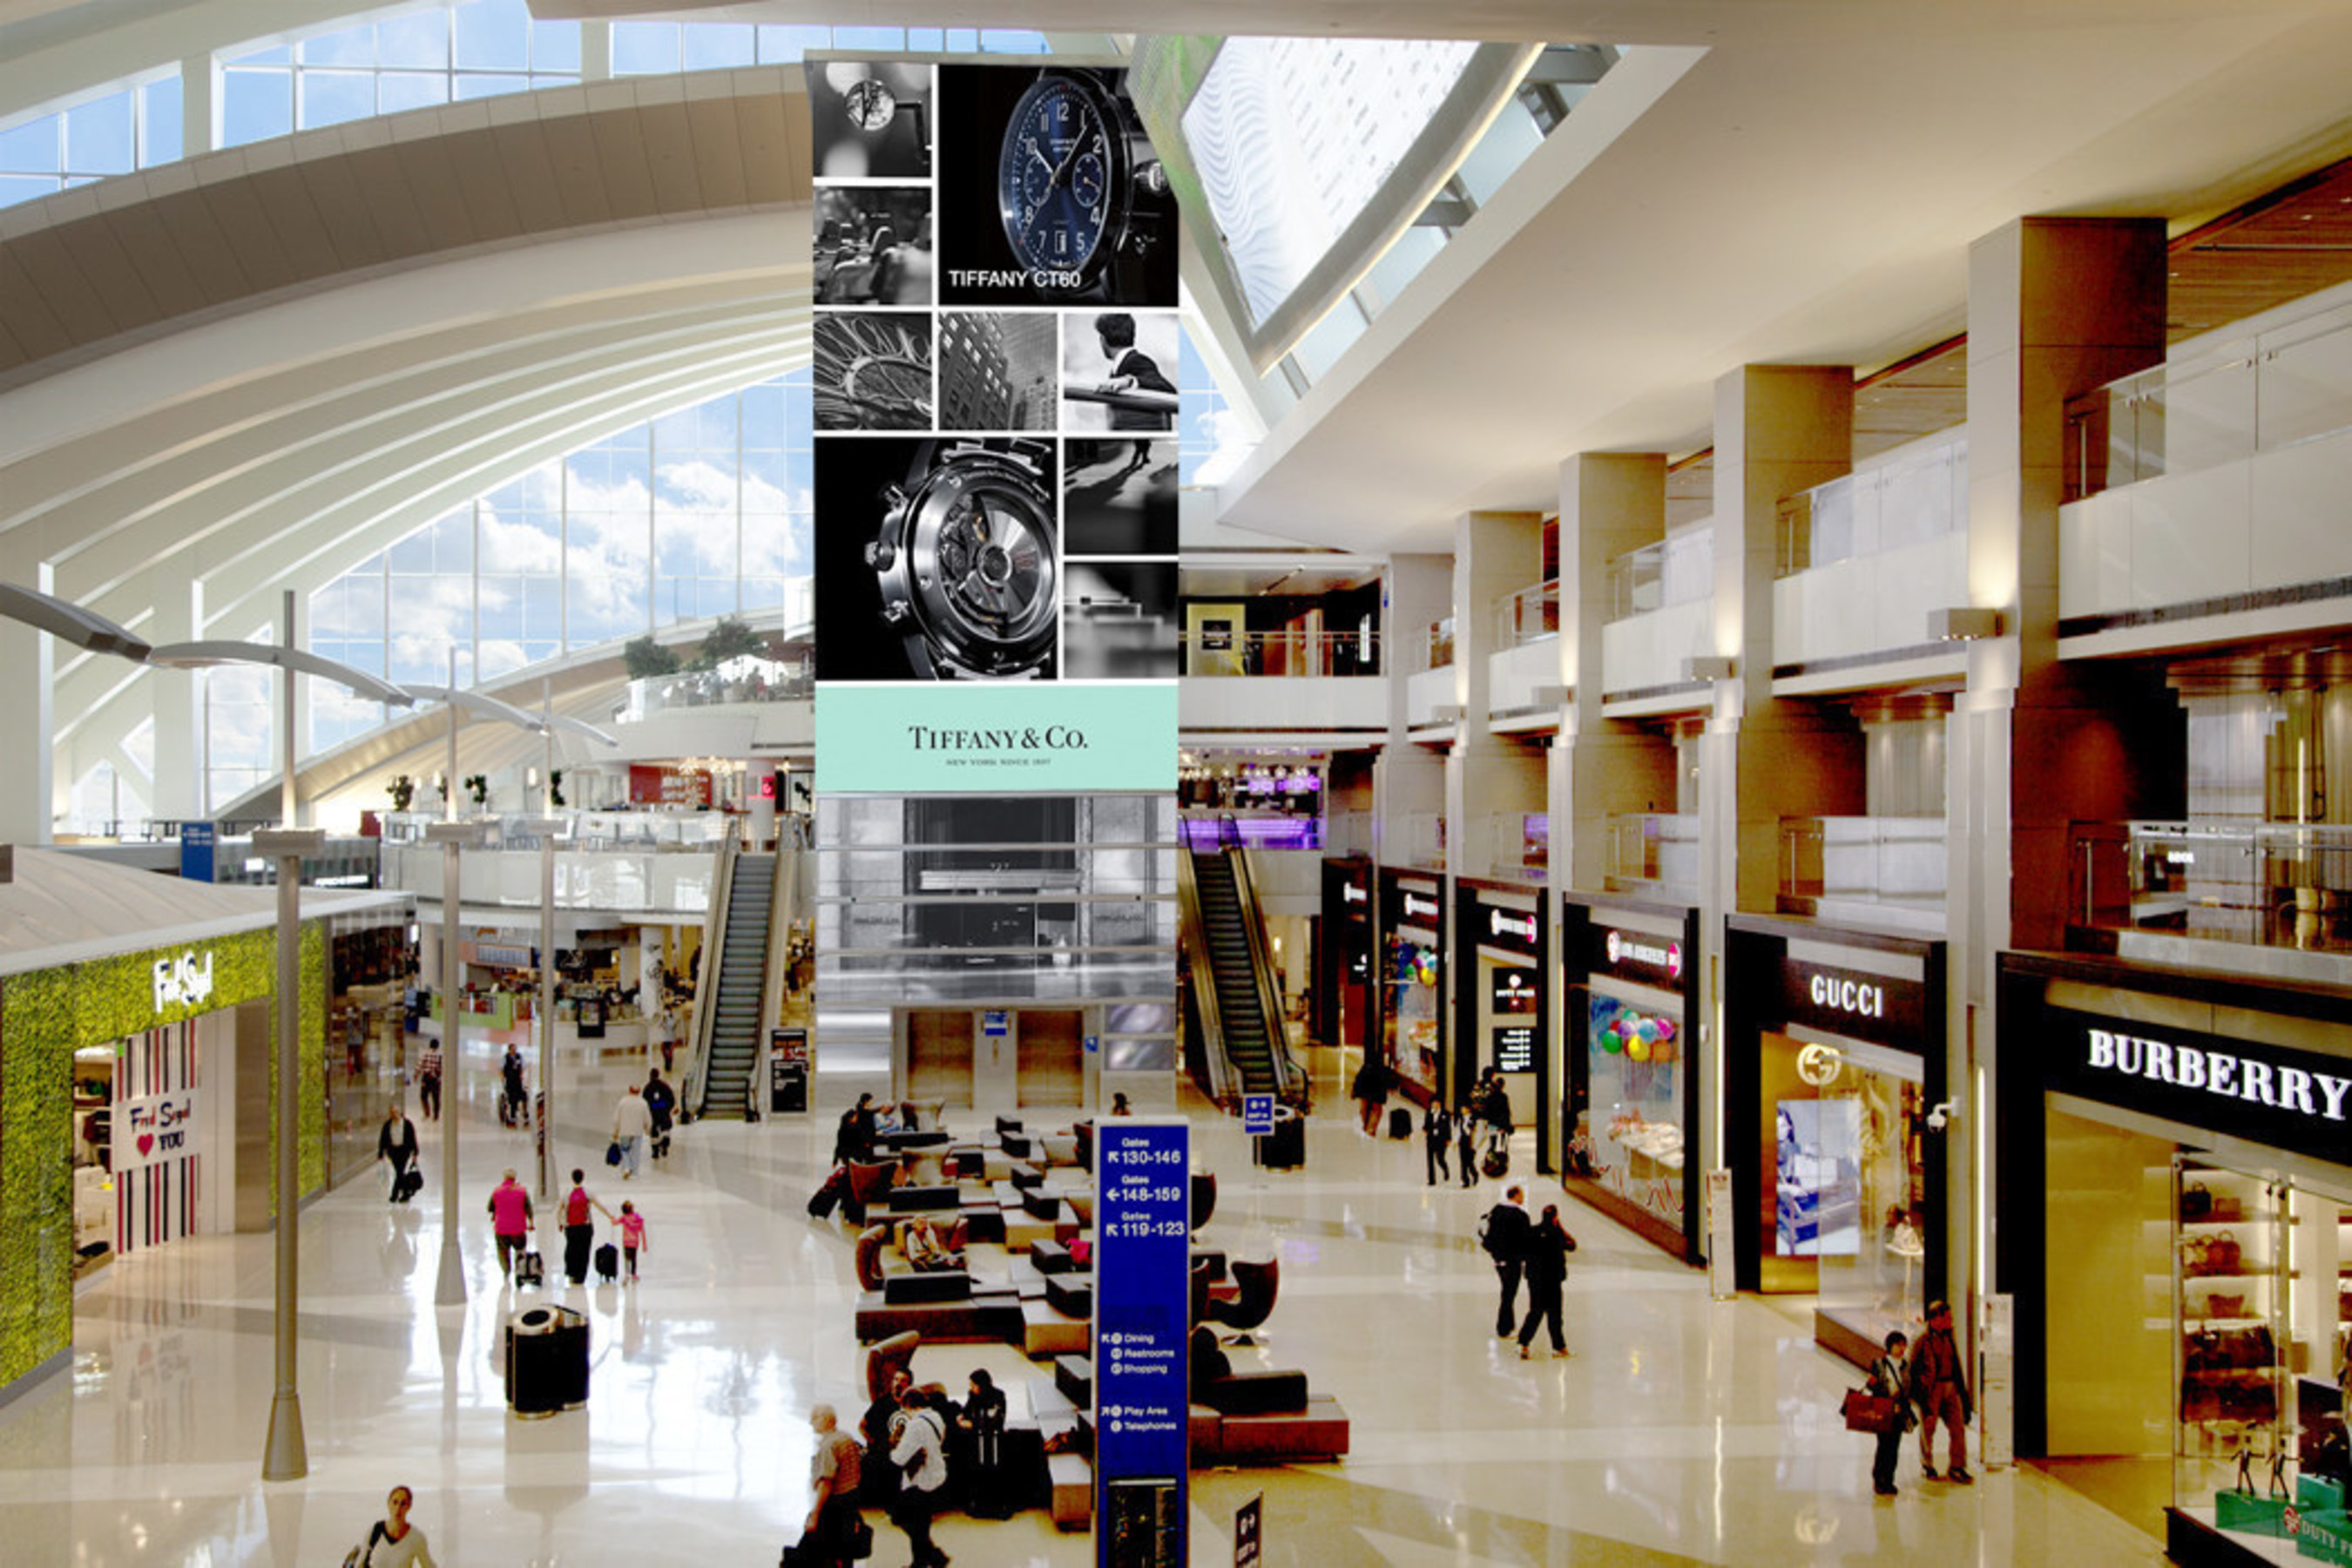 Tiffany & Co. Unveils New Outdoor Campaign on JCDecaux's Largest Digital Display in a US Airport